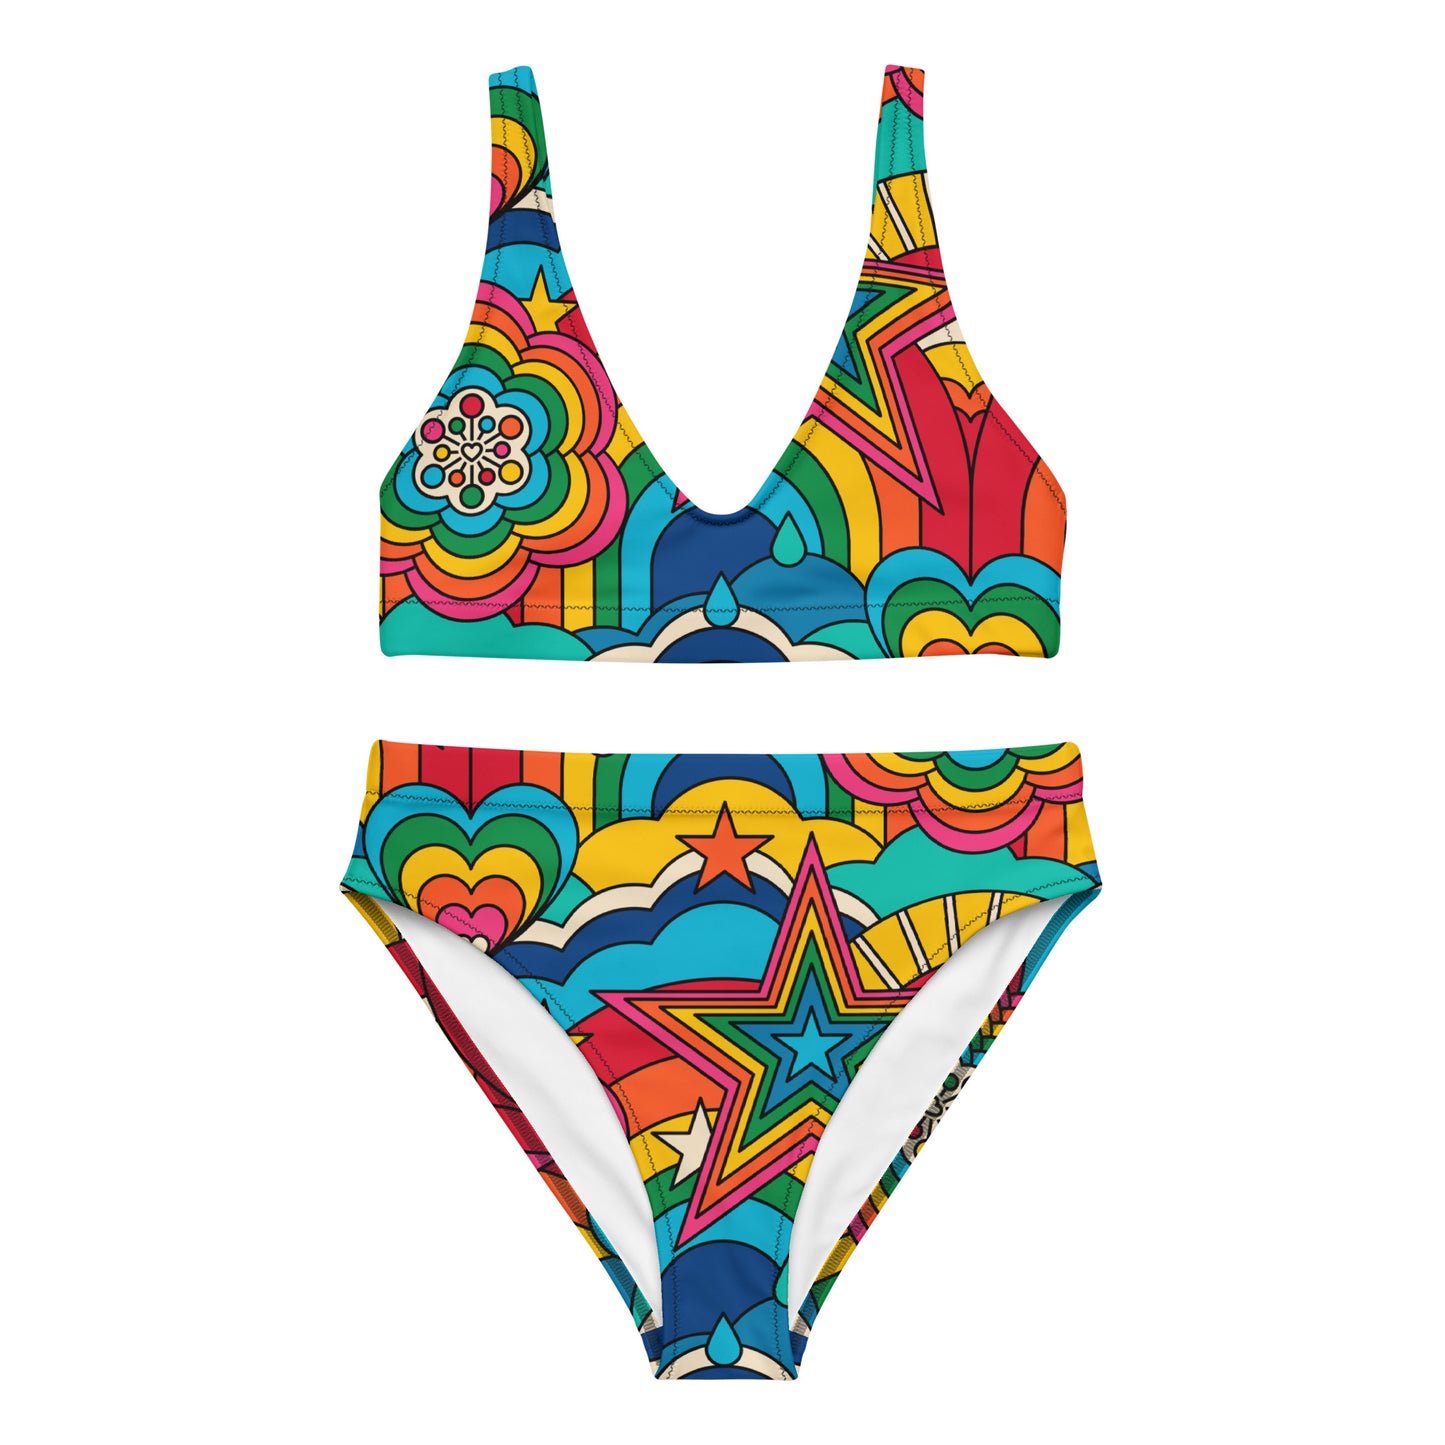 RAINBOW RAVE - Bikinis made of recycled material